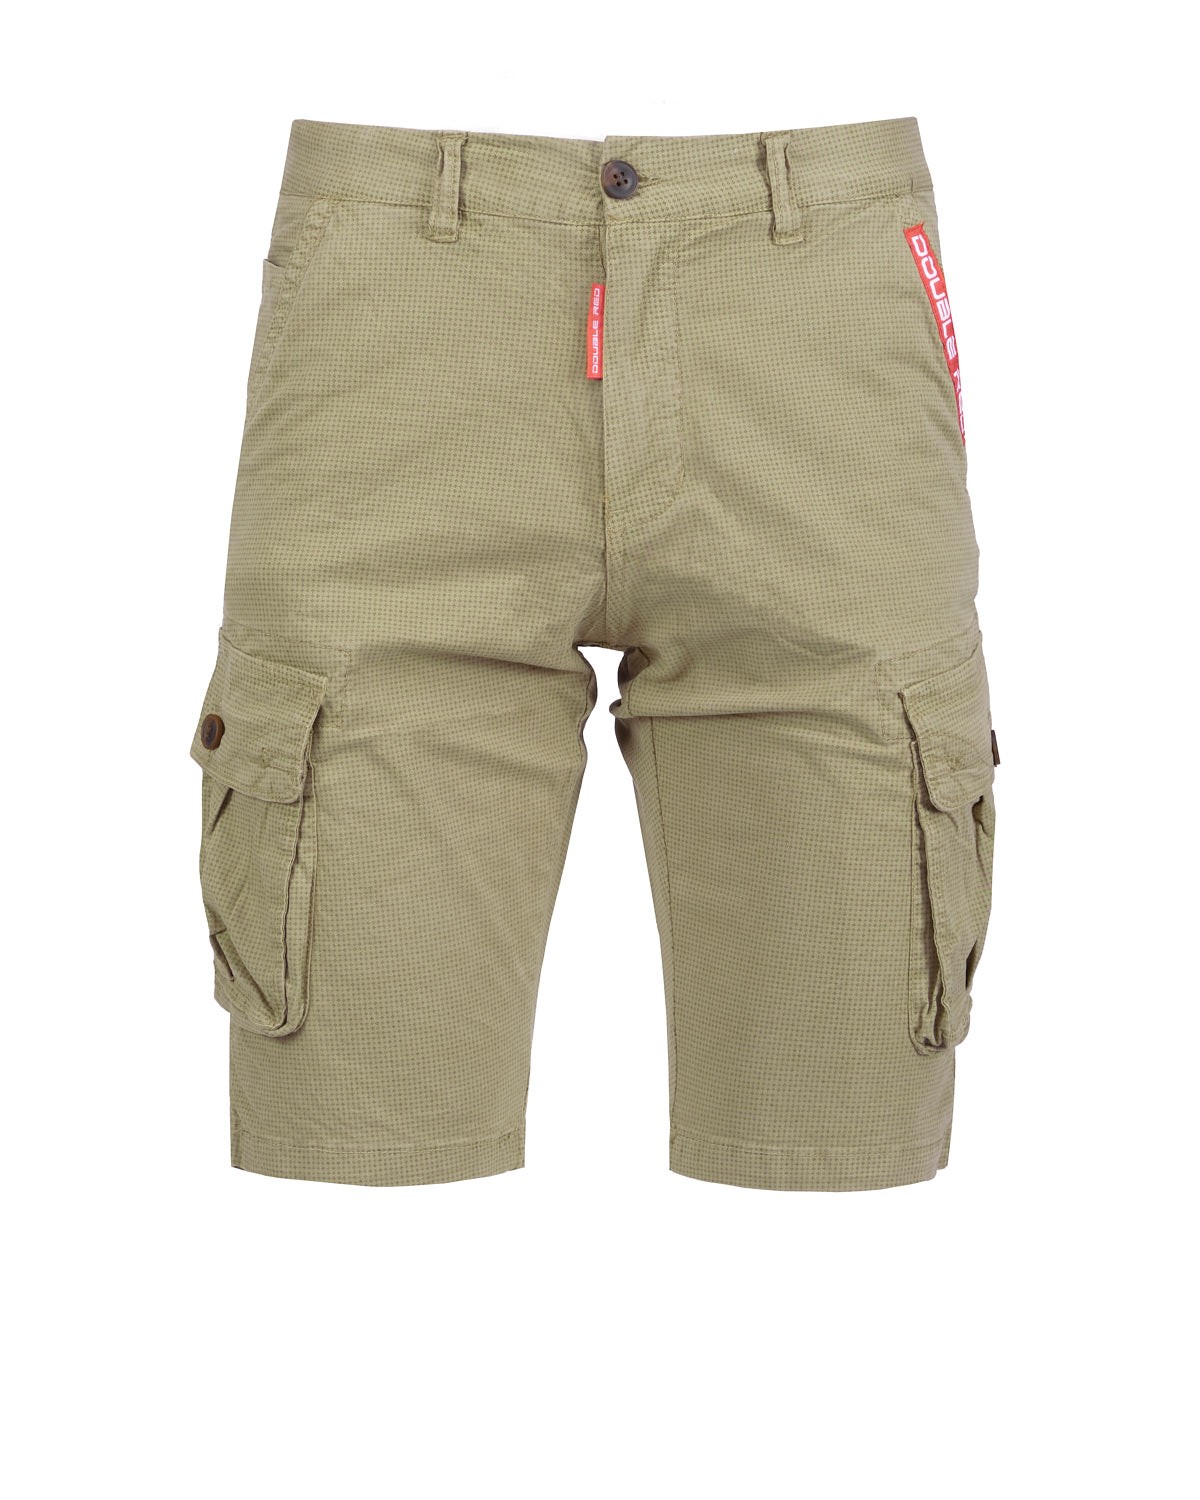 - Red SQUERS Double Shorts Desert